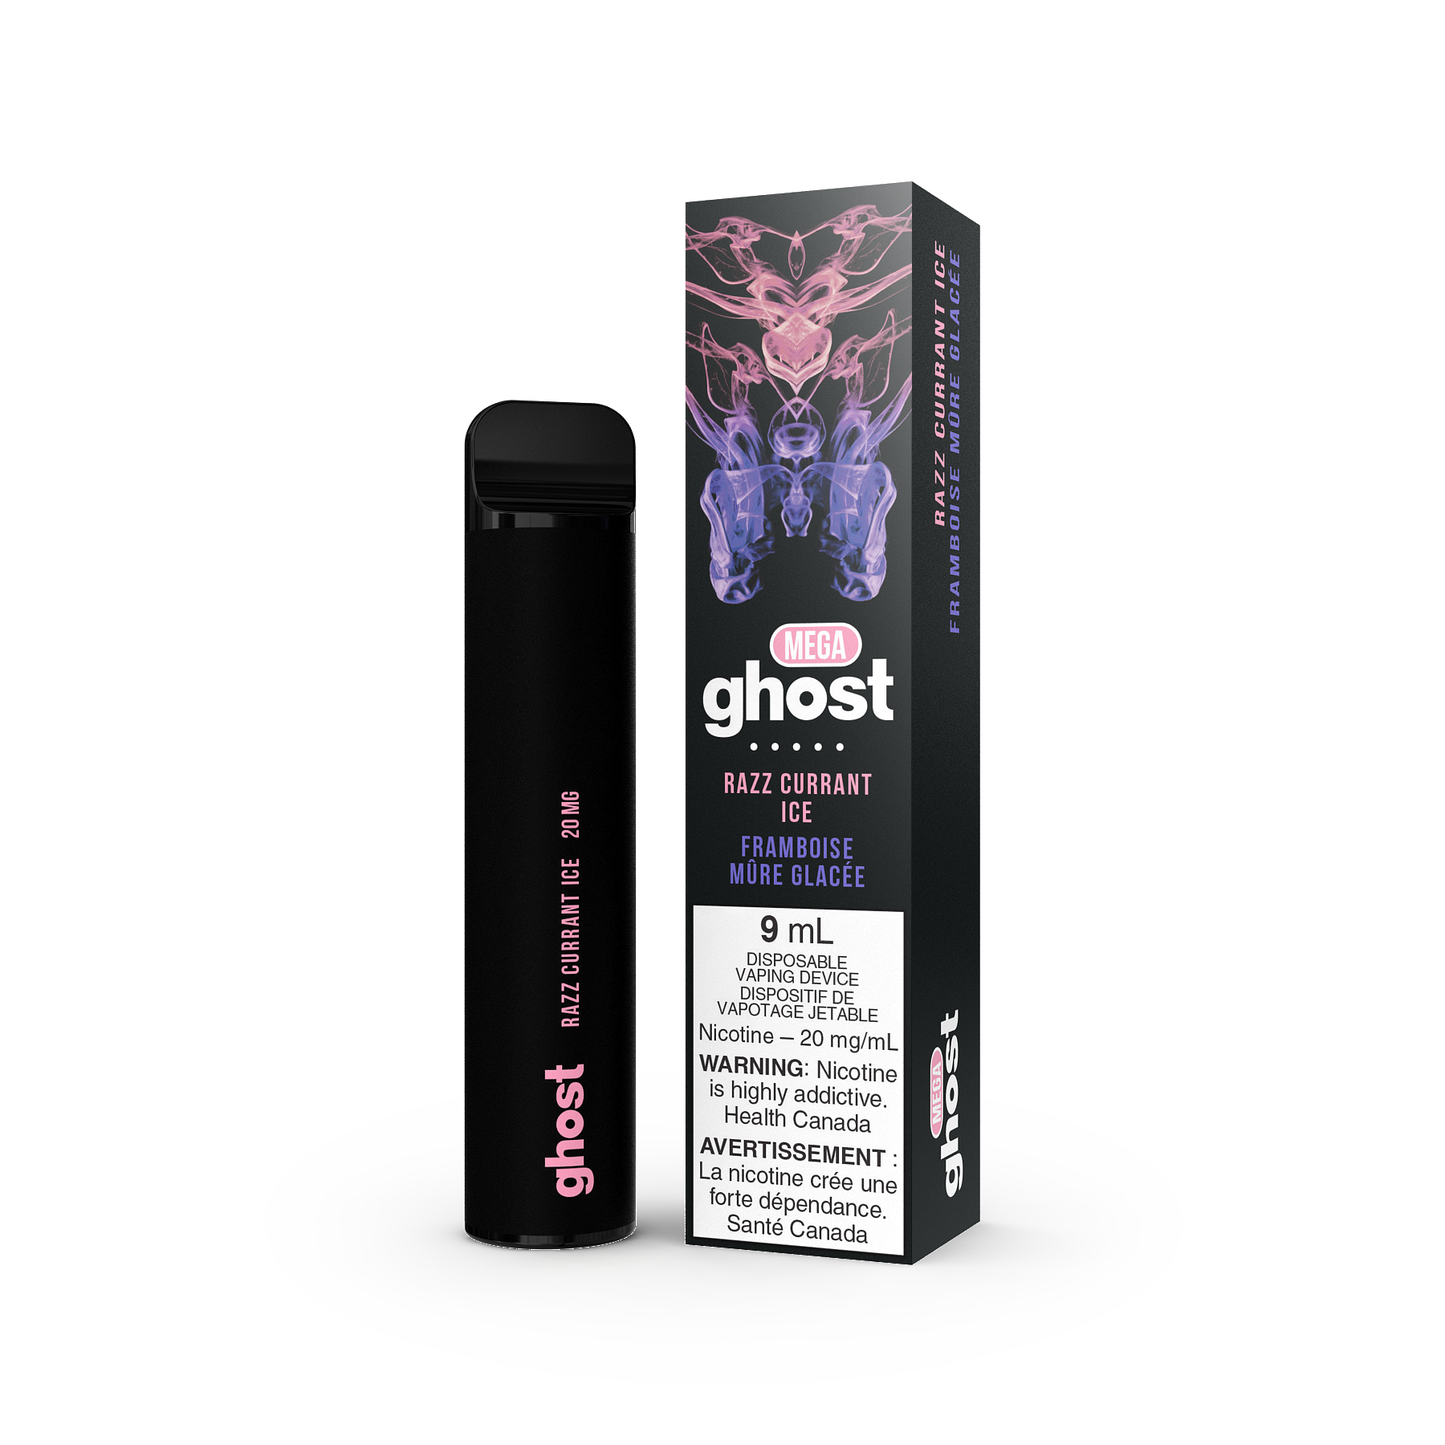 Ghost Mega 3000 Puffs Disposable Razz Currant Ice